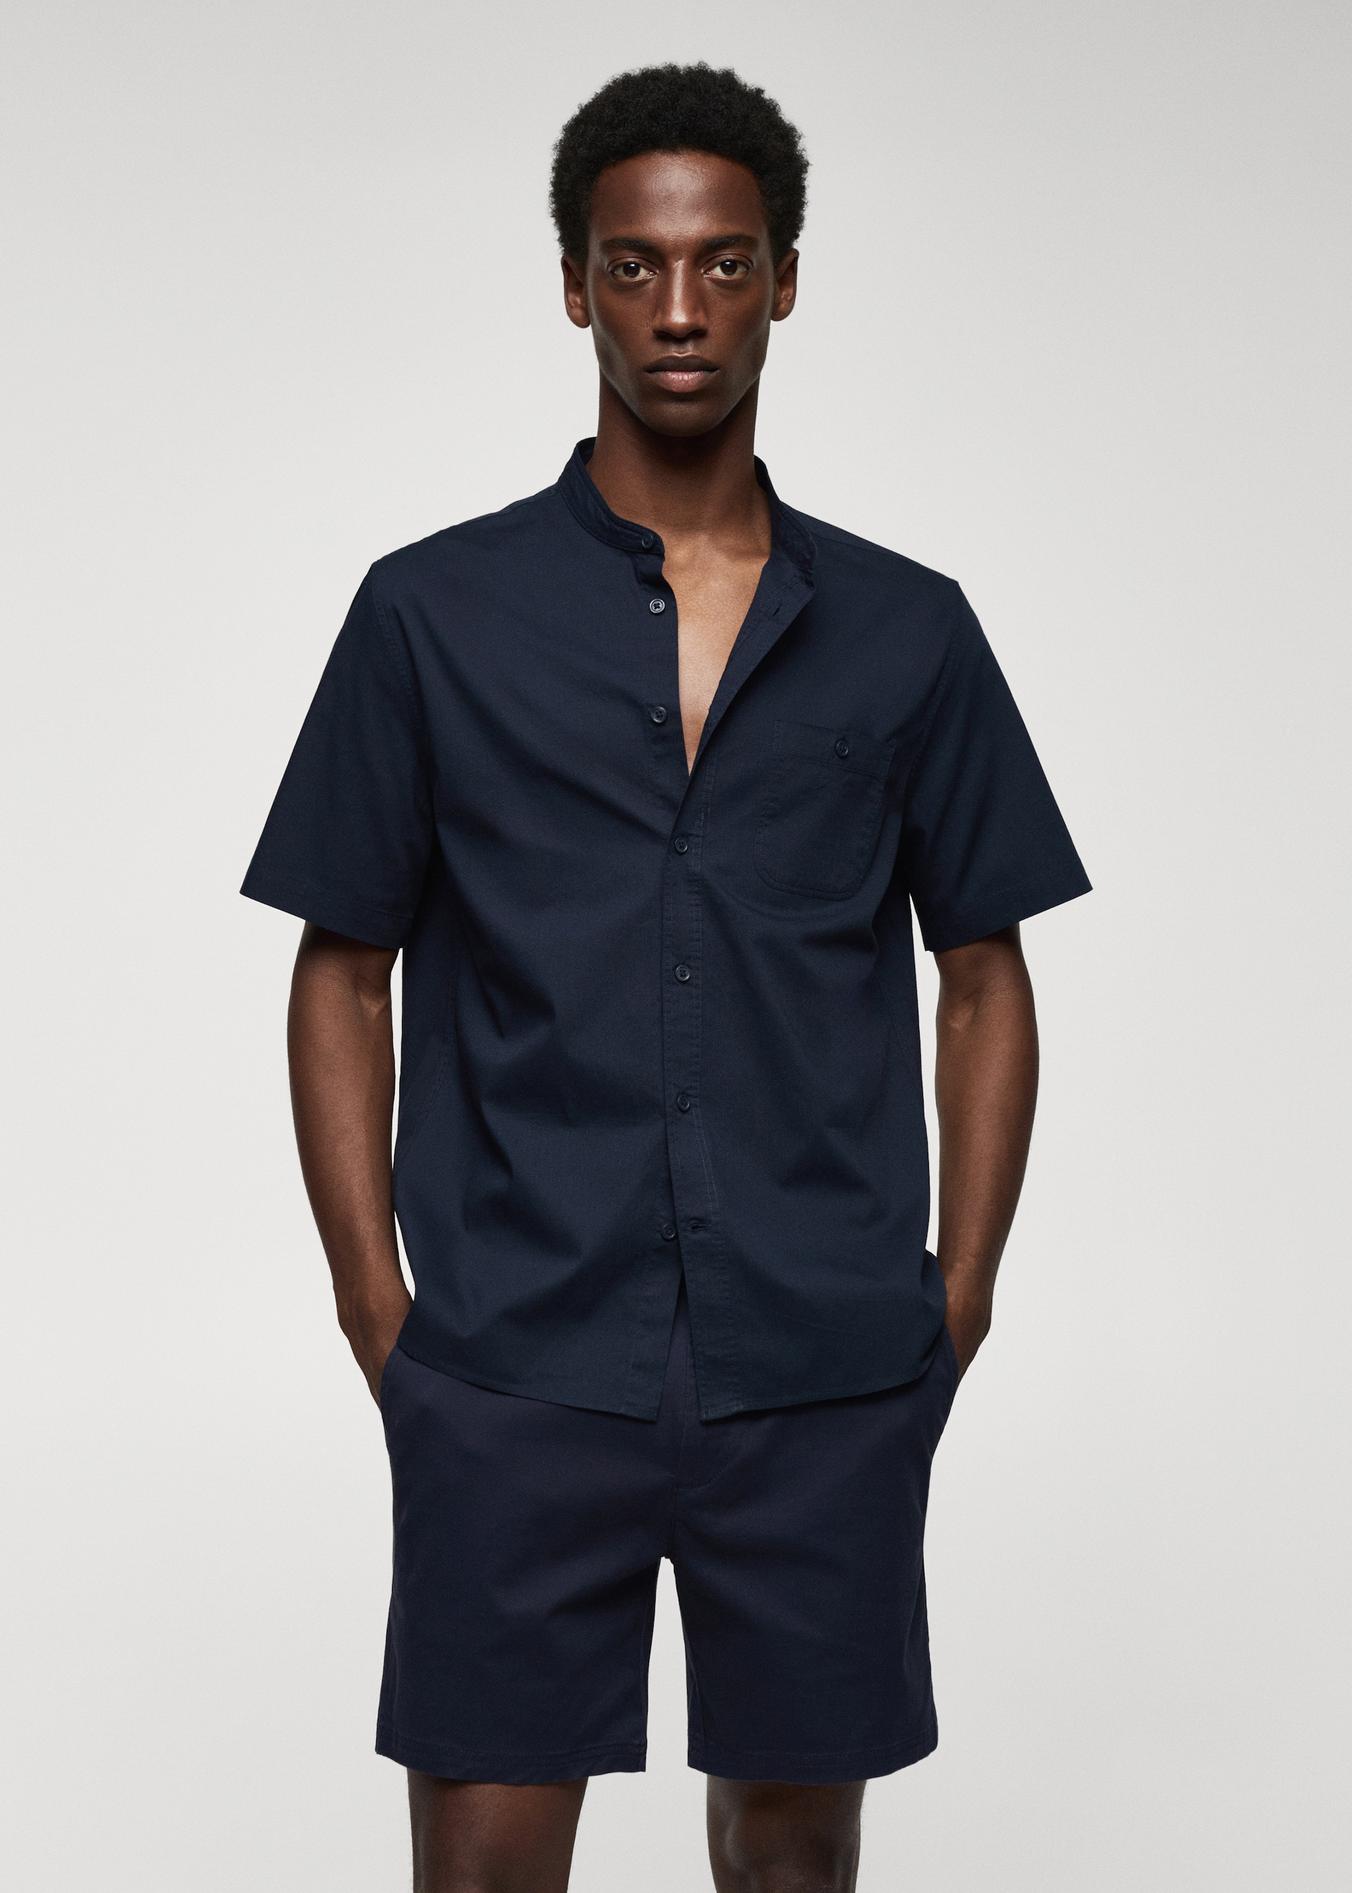 100% cotton mandarin collar shirt offers at S$ 29.9 in HE by Mango